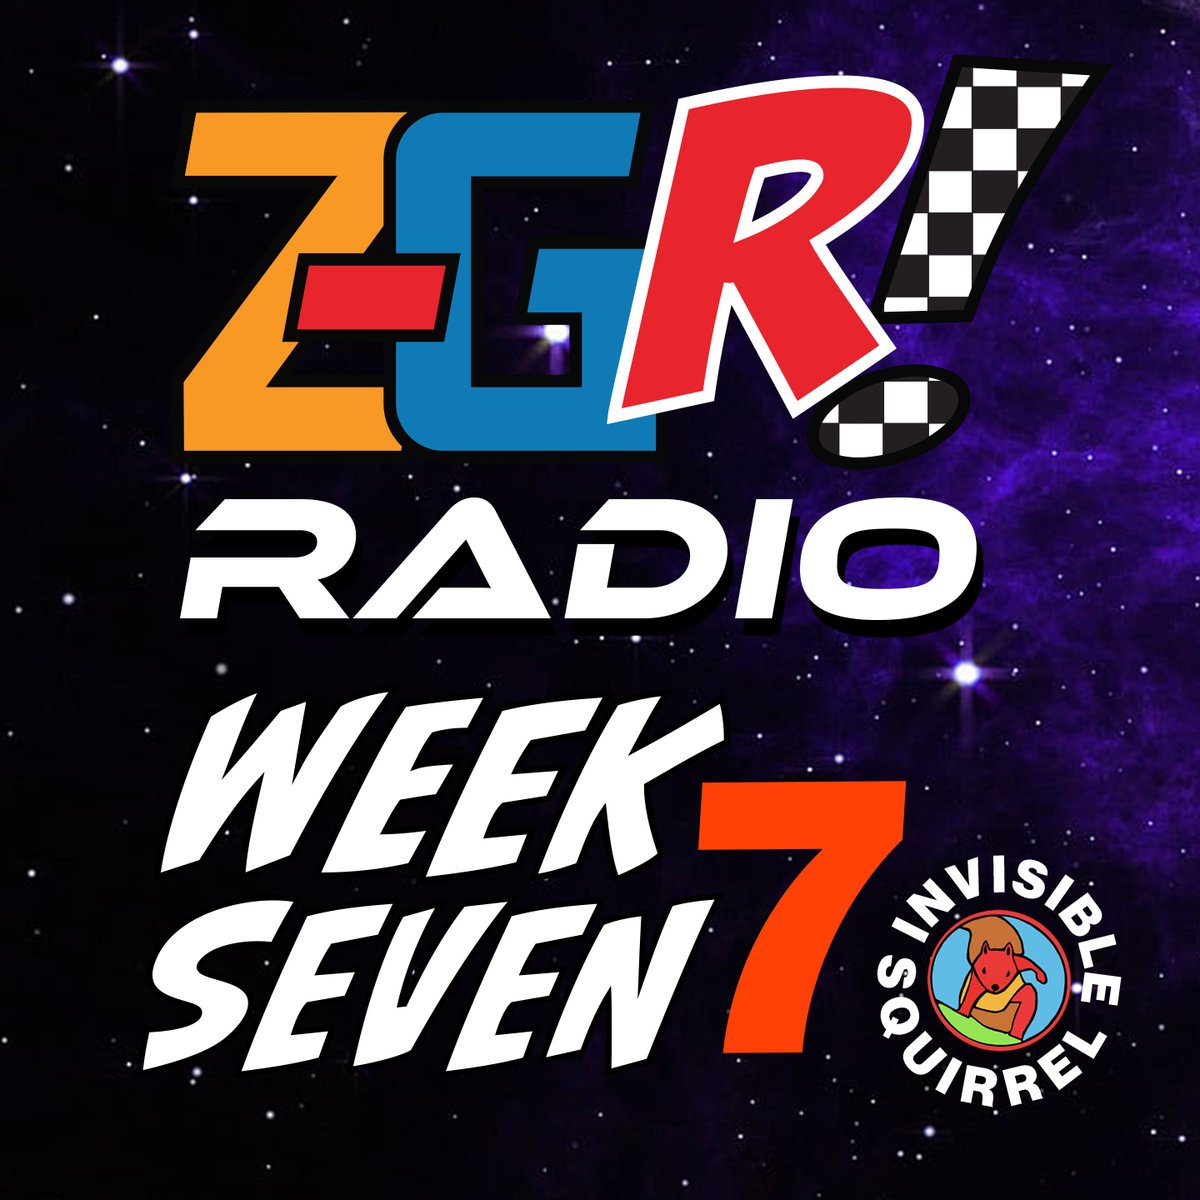 Episode 7 of Z-GR! Radio launches Friday night! Our Featured Guest is Invisible Squirrel, and with a lineup that includes Estella Dawn and Whitney Tai, you know it'll be awesome! Friday, April 12 @ 7PM PST NEWHD LA Saturday, April 13 @ 9PM EST NEWHD NY newhdmedia.com